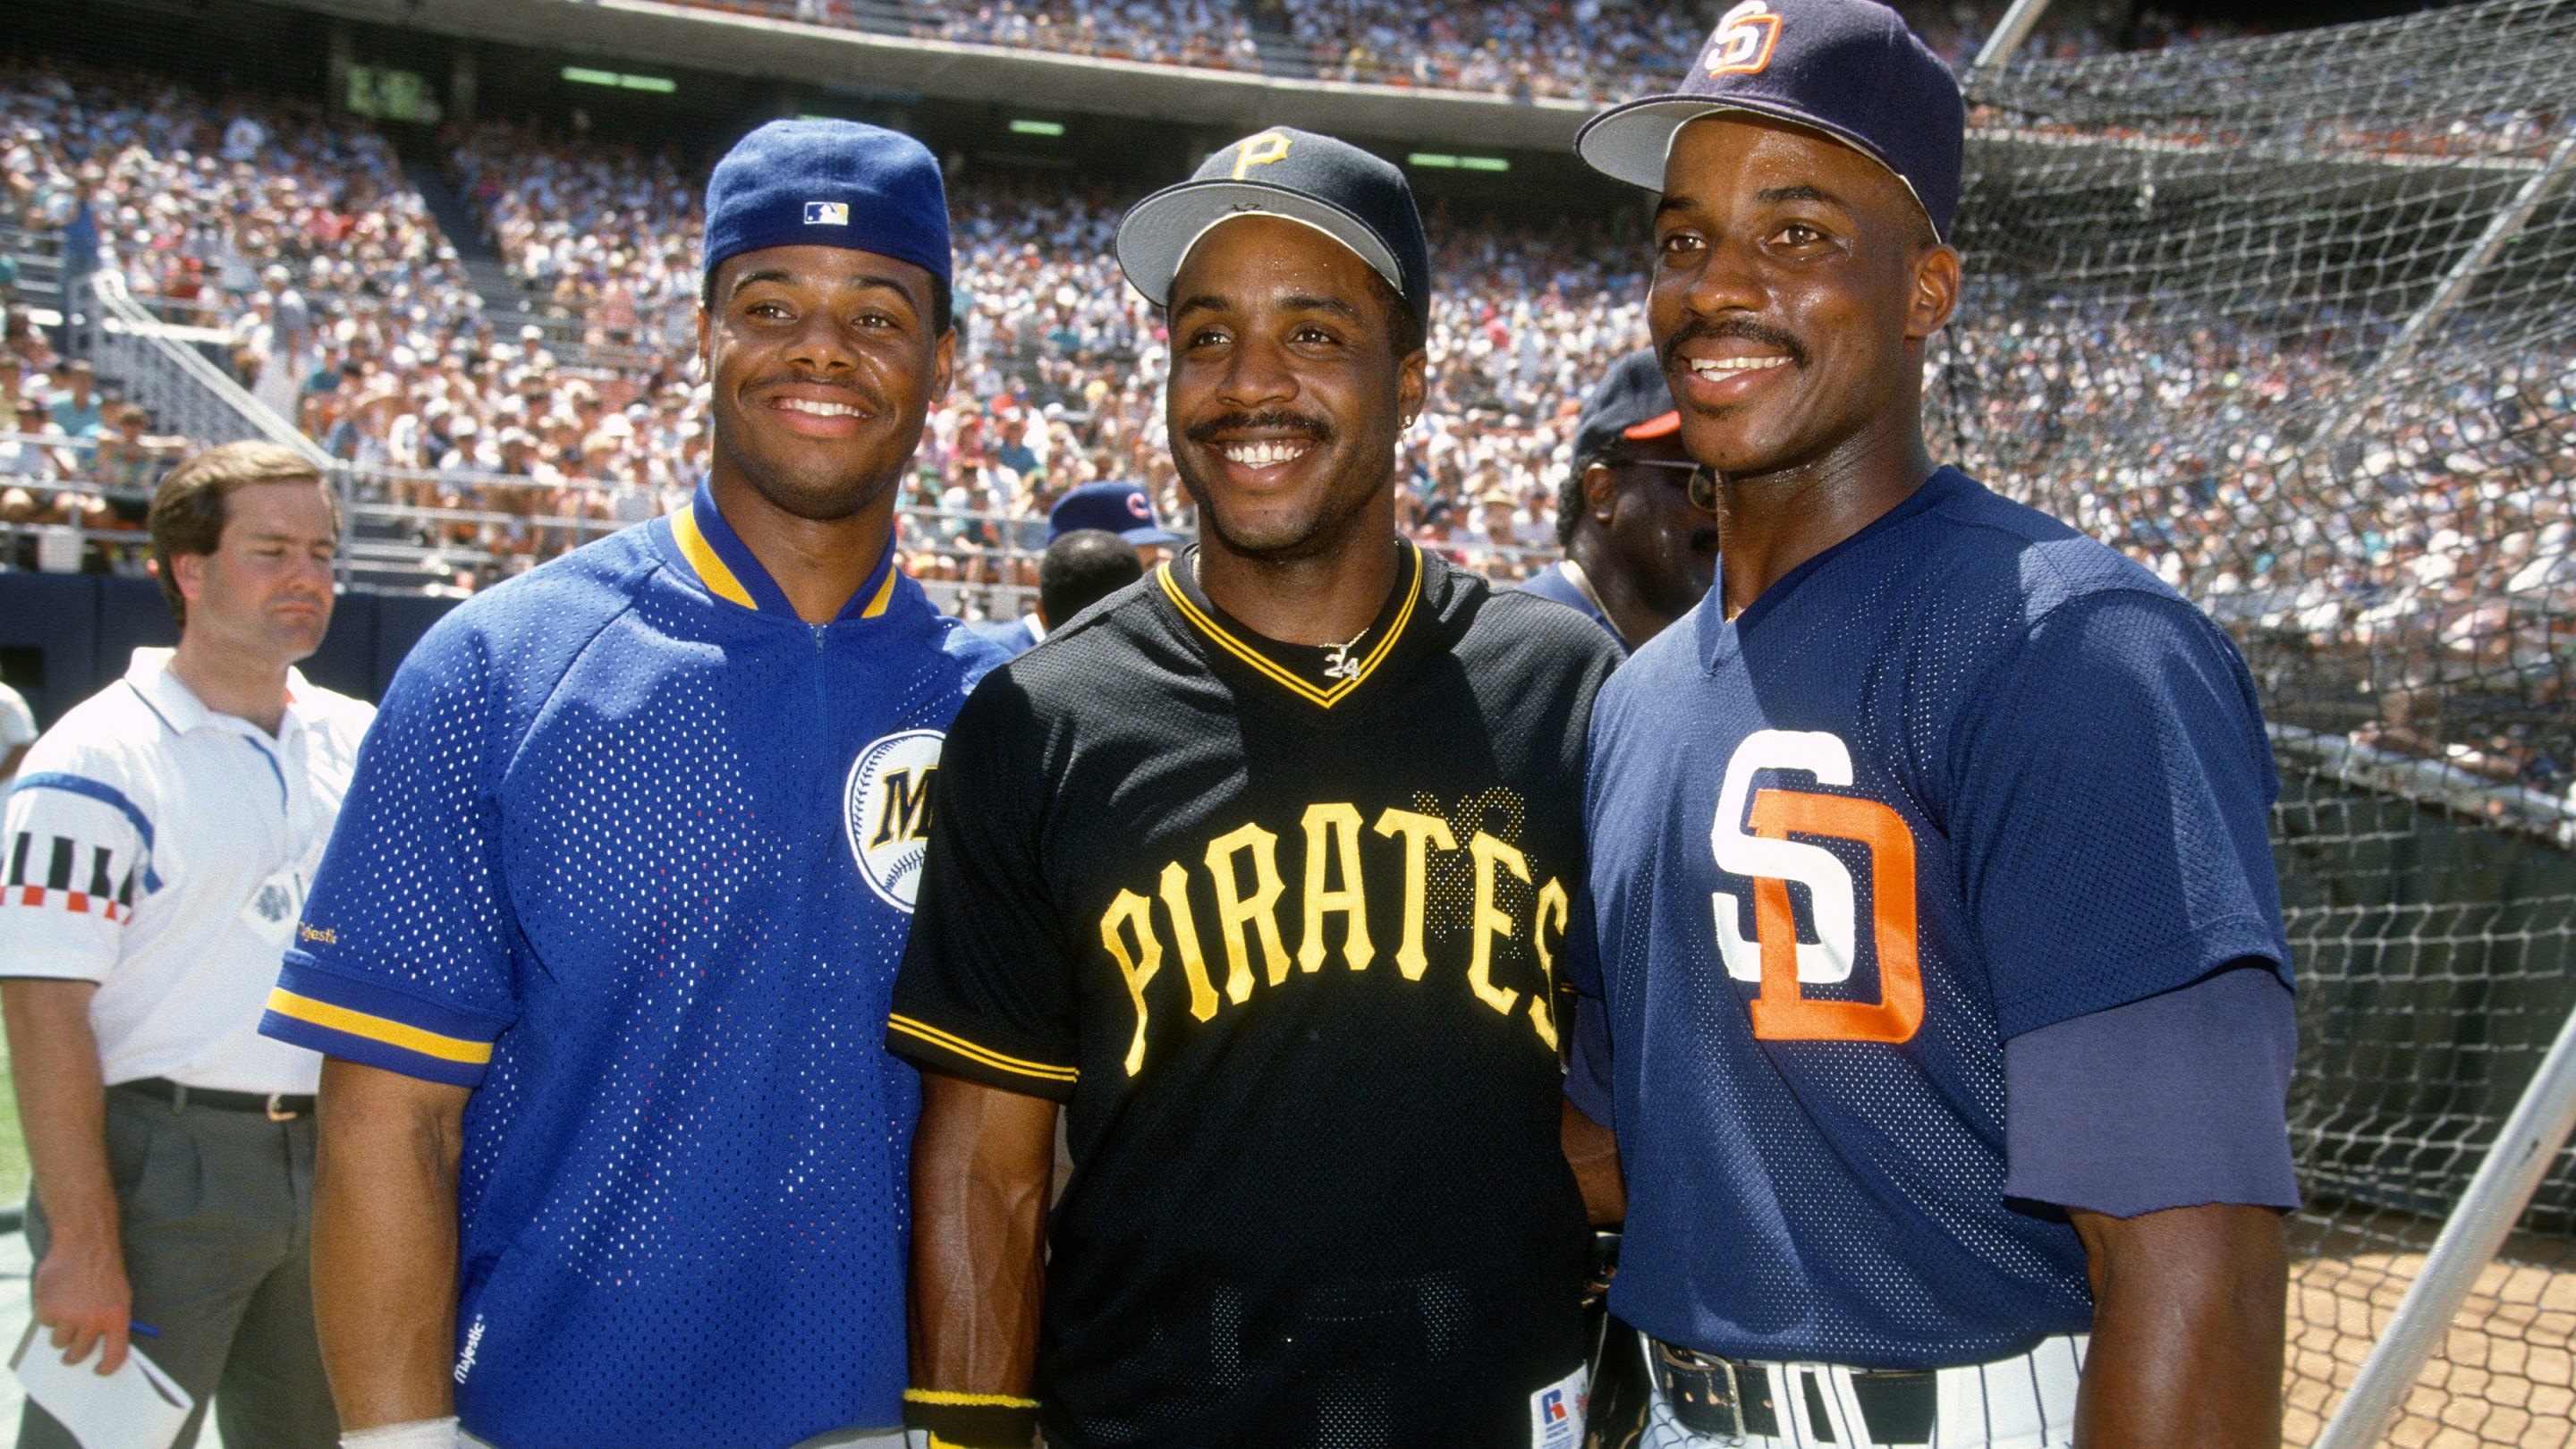 SAN DIEGO, CA - JULY 14: Ken Griffey Jr #24 of the Seattle Mariners, Barry Bonds #24 of the Pittsburgh Pirates and Fred McGriff #19 of the San Diego Padres poses together for this portrait during batting practice prior to the 1992 Major League Baseball All-Star game July 14, 1992 at Jack Murphy Stadium in San Diego, California. The American League beat the National League 13-6. (Photo by Focus on Sport/Getty Images)